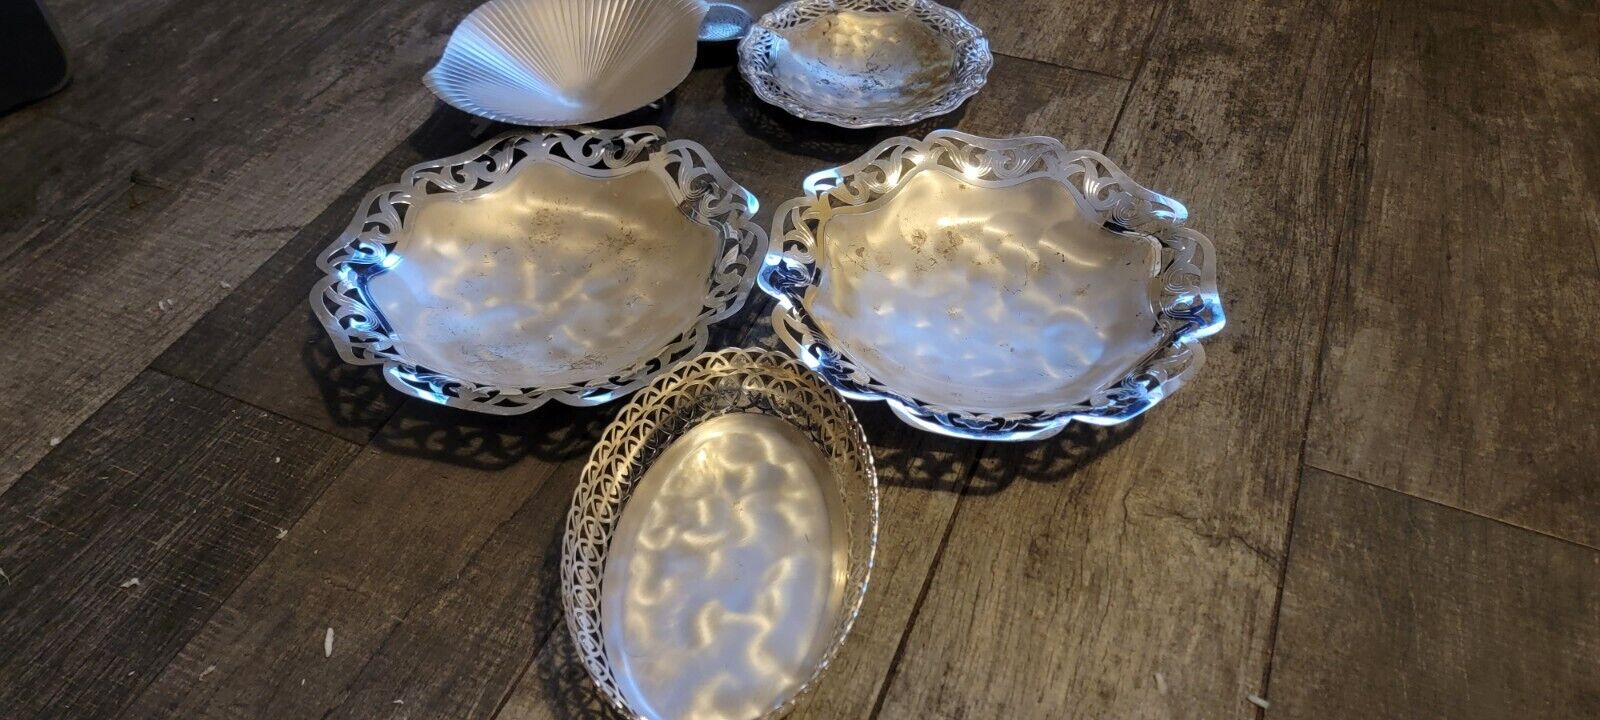 LOT 7 VINTAGE WMF IKORA SILVER-PLATED BOWL - MADE IN GERMANY  SET of 7